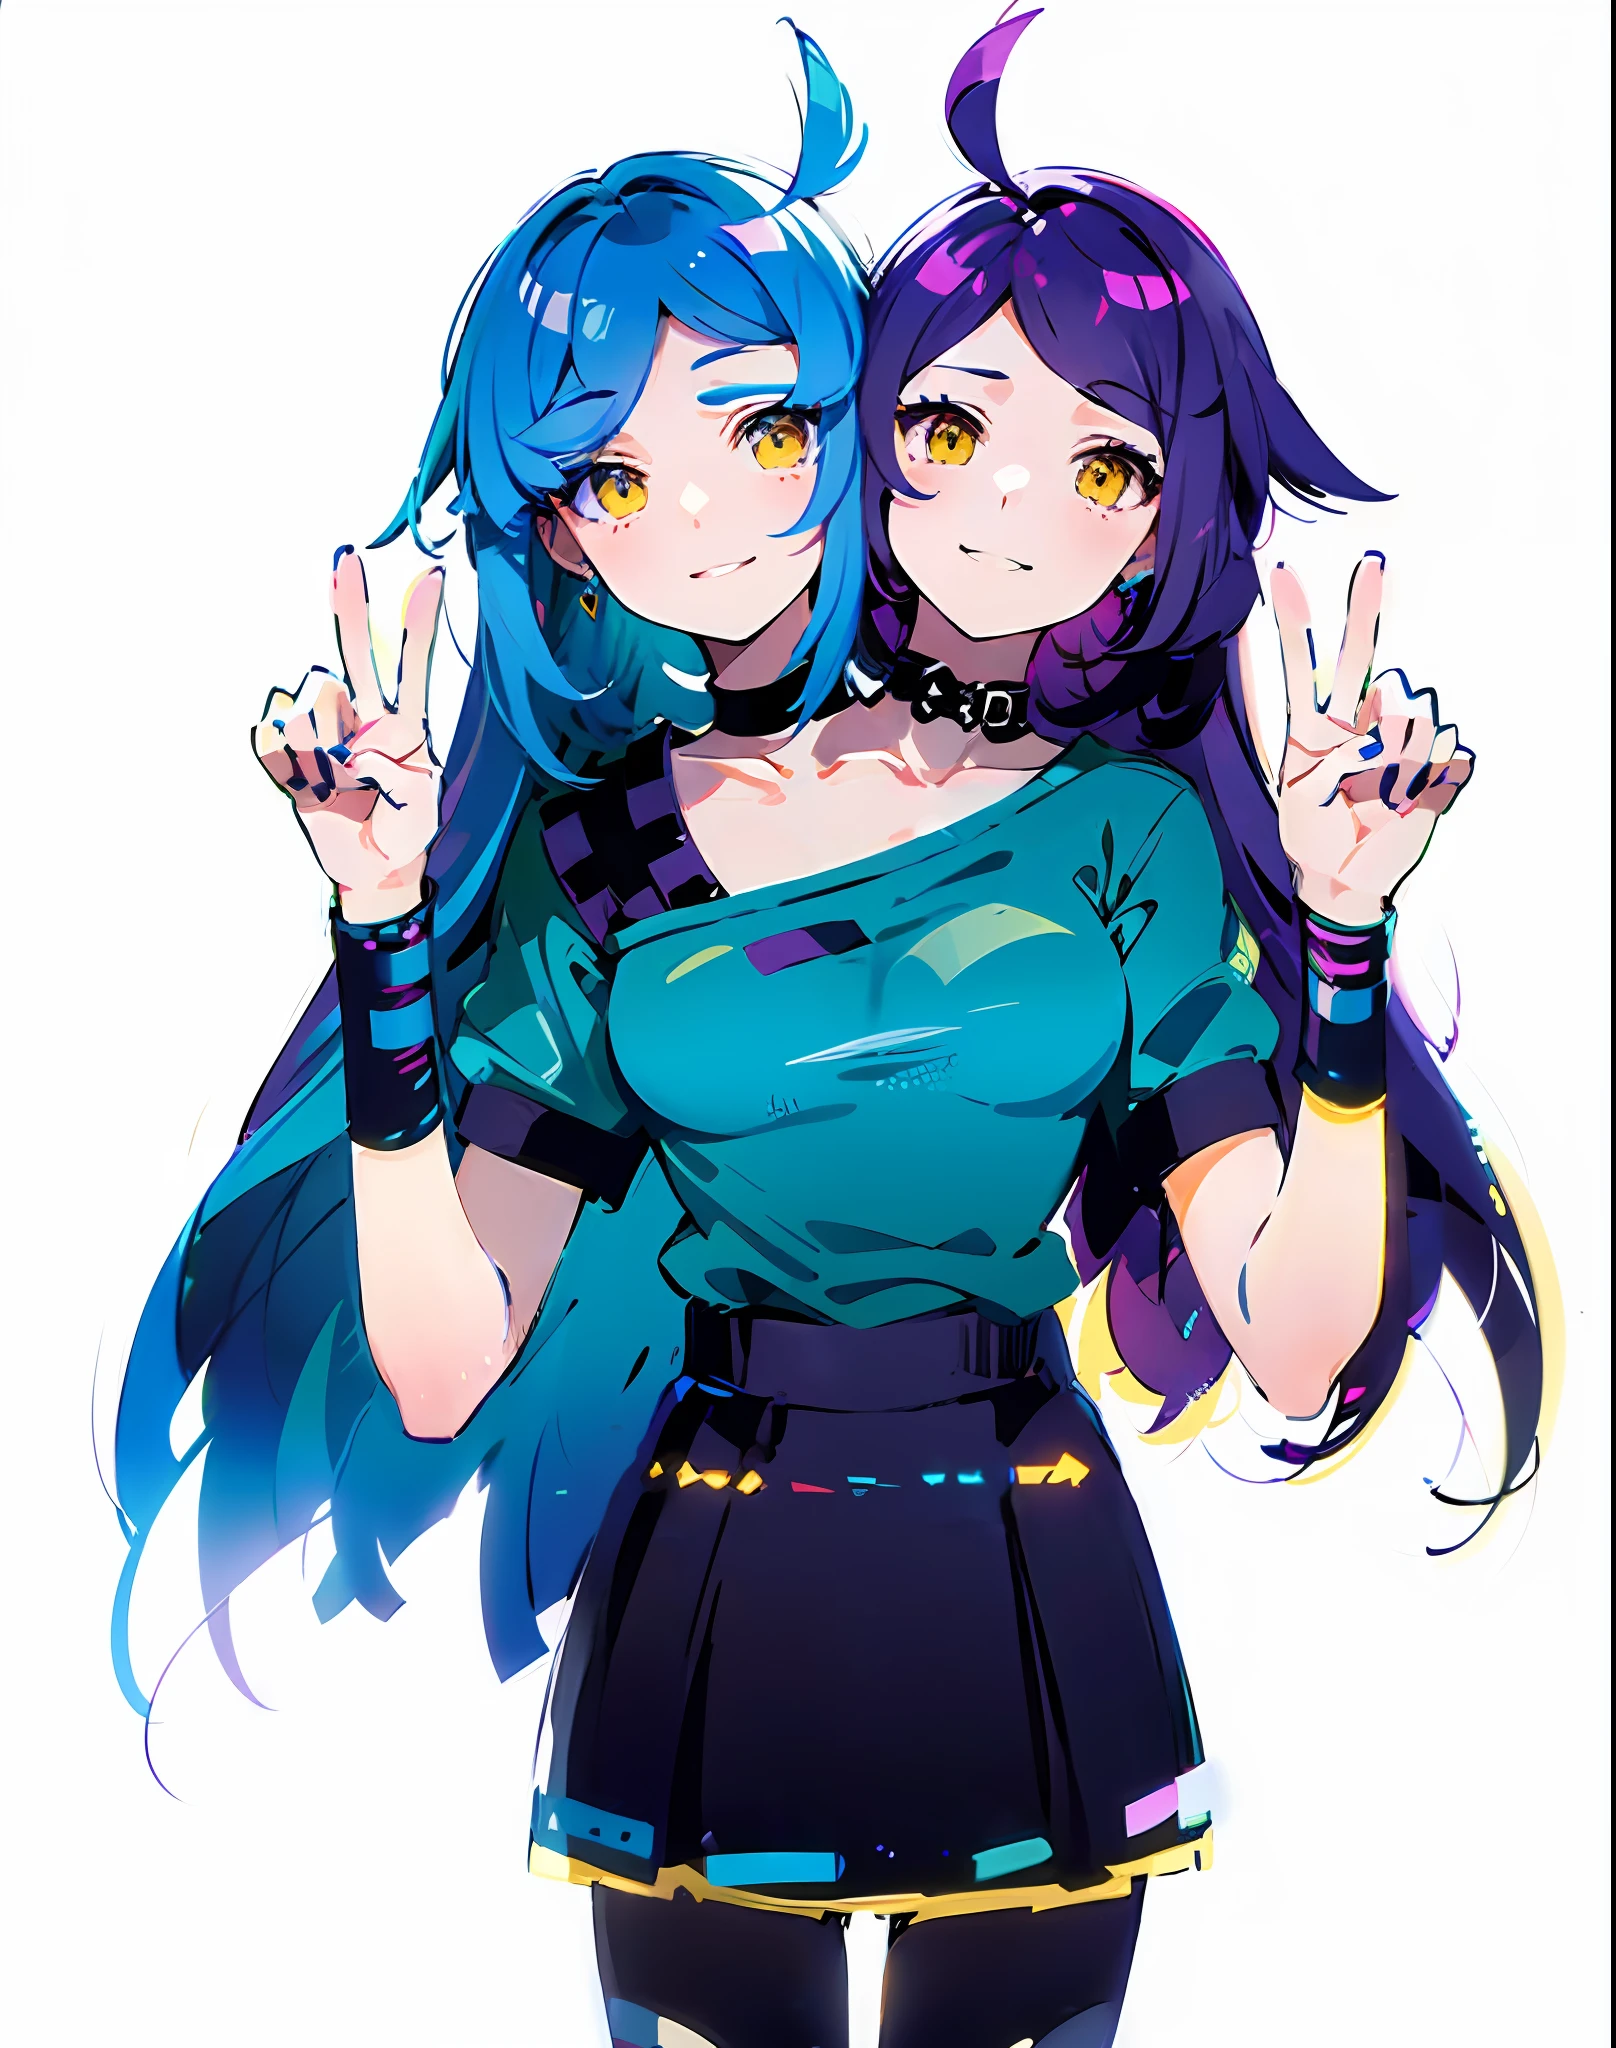 best resolution, (2heads:1.5),anime girl with two heads, blue dyed hair, purple dyed hair, different hair color, yellow eyes, ahoge, chokers, holding out peace signs, black t-shirt, blue top, black wristbands, , blue skirt, black stockings, high boots,white room background